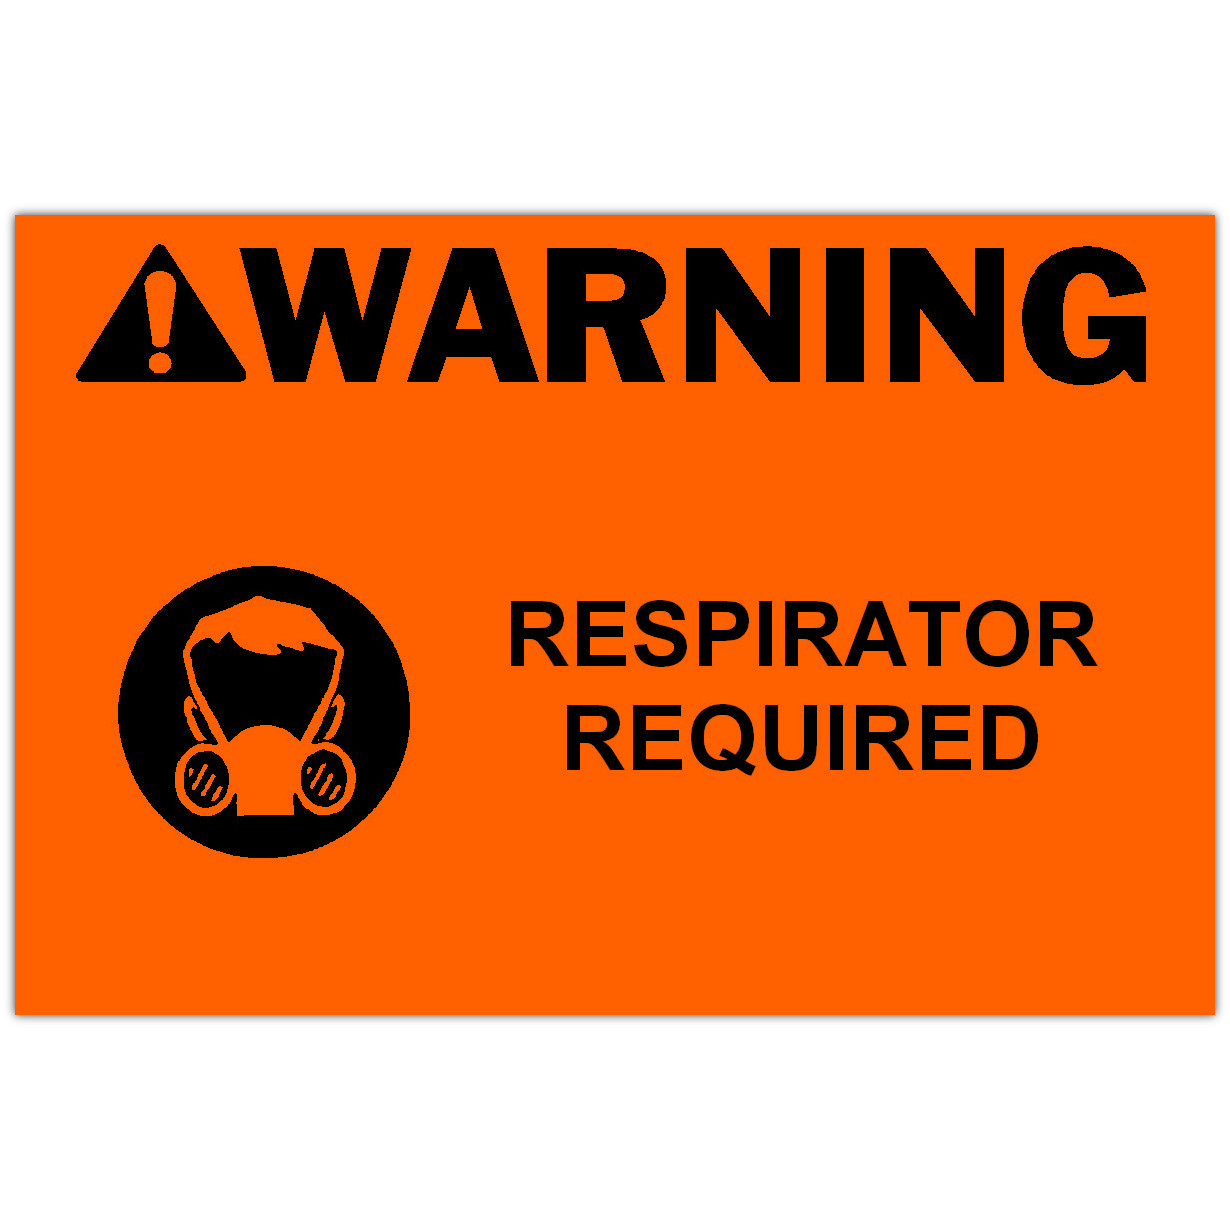 Detail view for 4" x 6" WARNING Respirator Required Safety Label